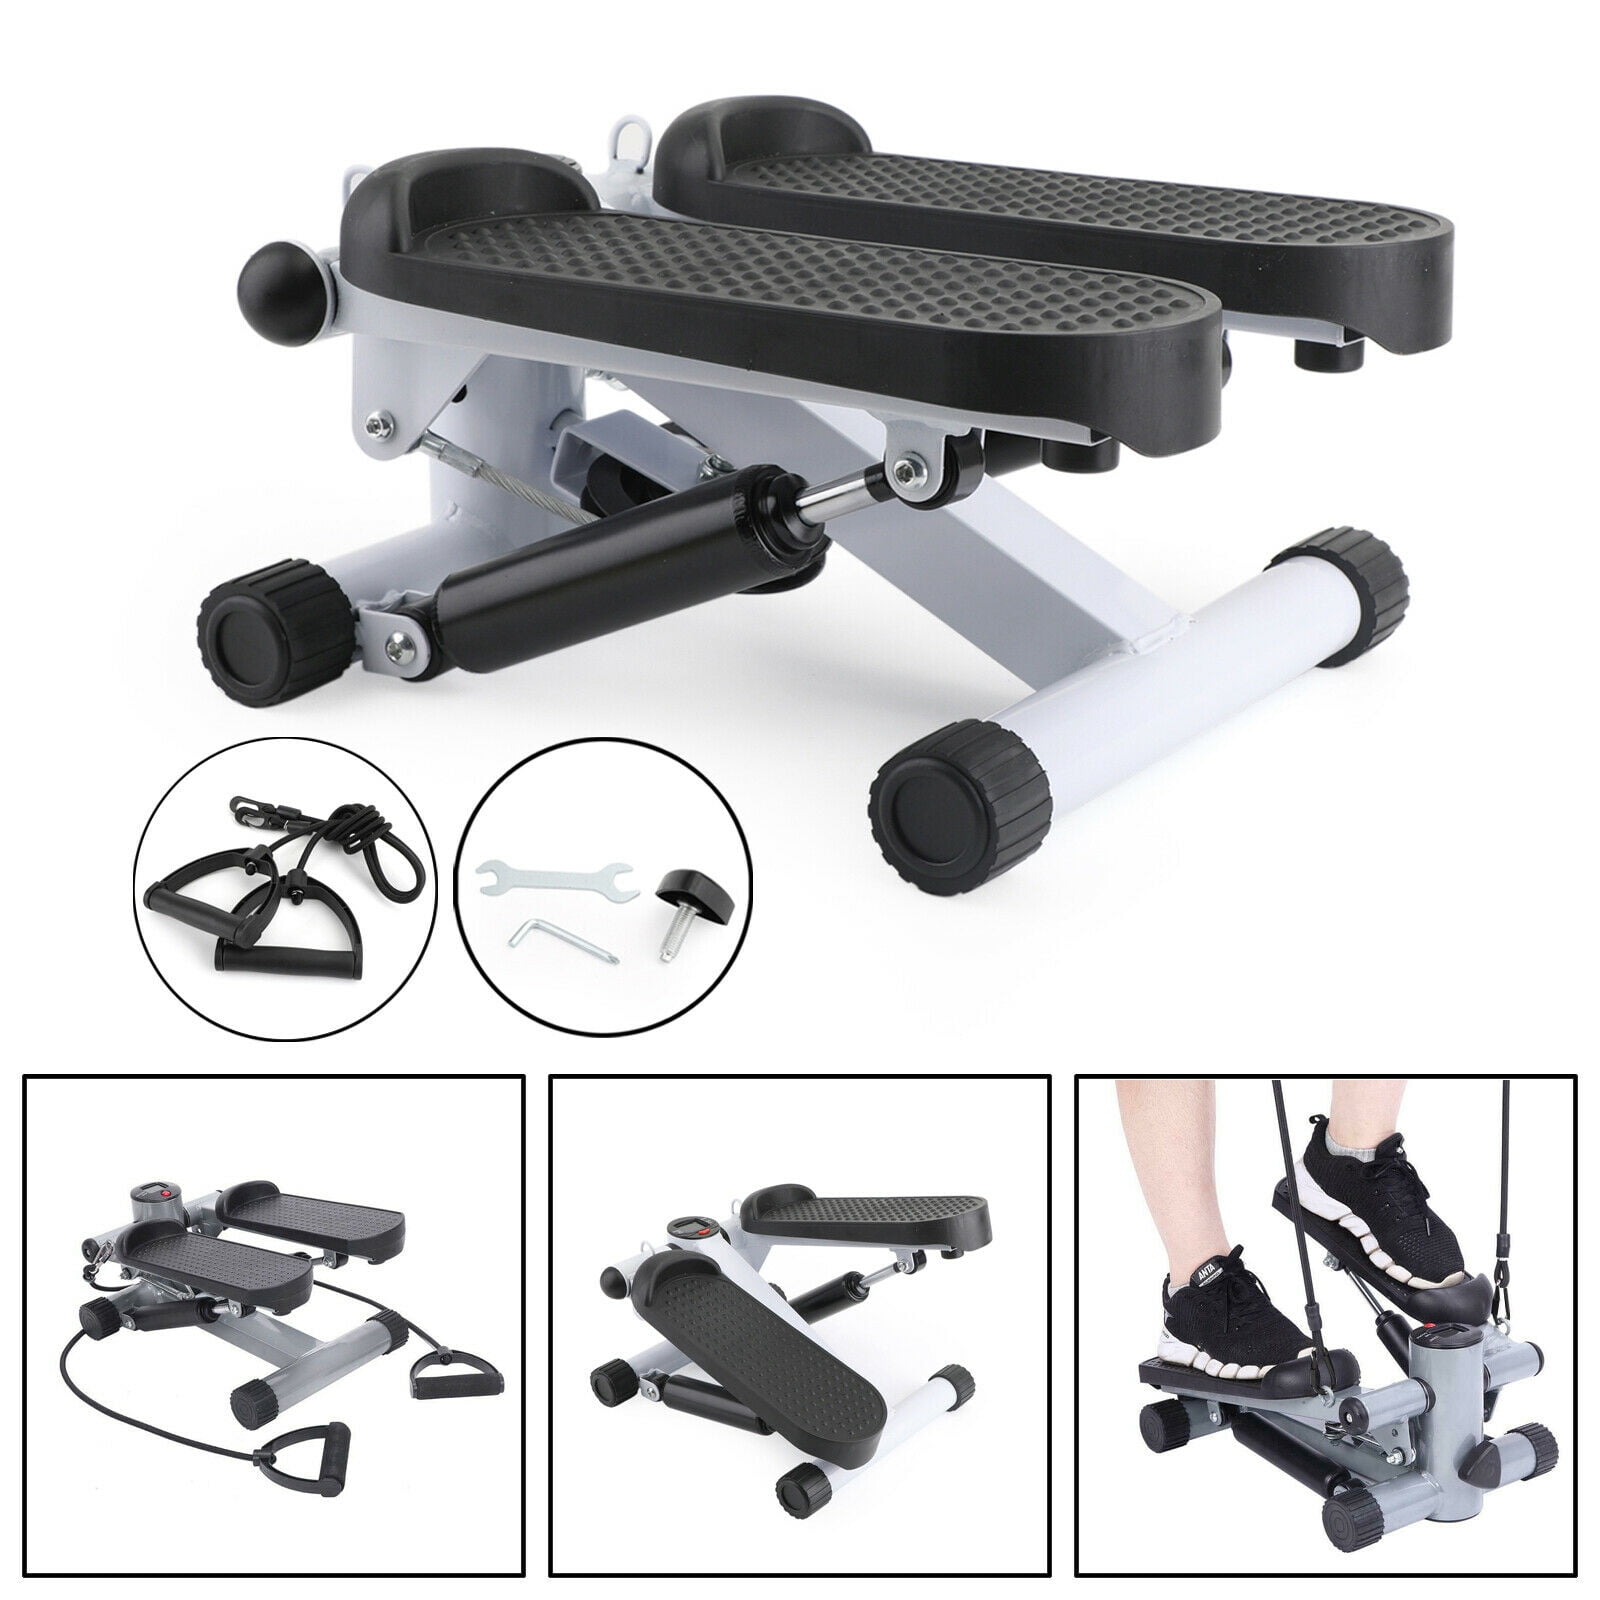 BIGTREE Stair Stepper Exercise Equipment for Home Portable Fitness Mini Step Machine with Resistance Bands and Monitor Twisting Action Portable Hydraulic Cylinder with Resistance Band 